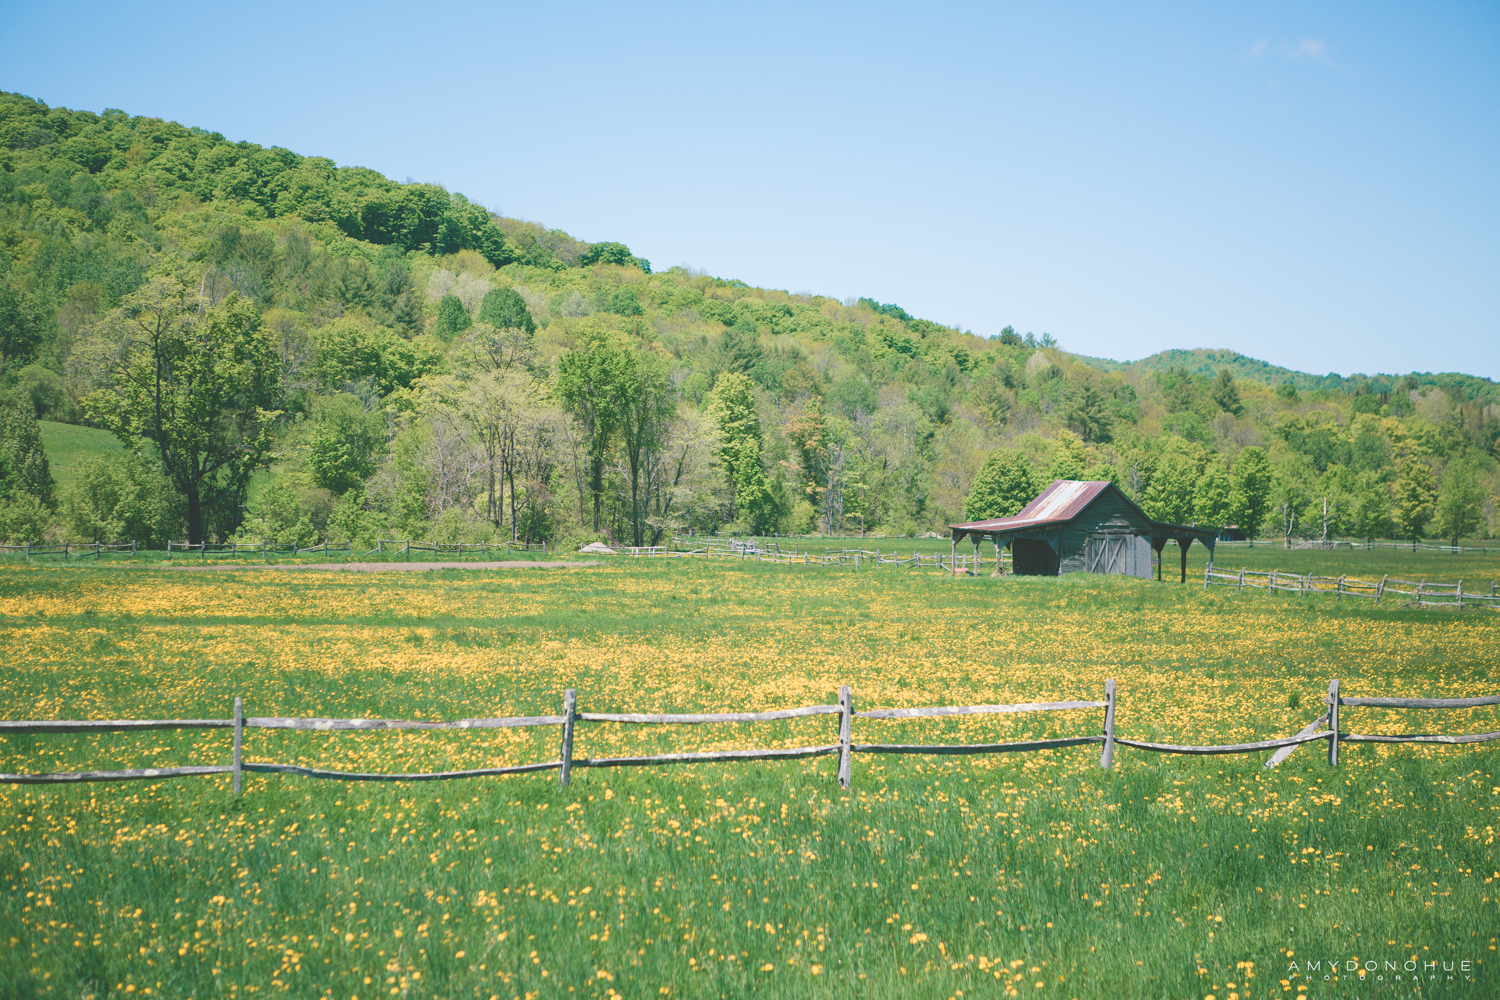 A field of dandelions with a rustic Vermont barn.